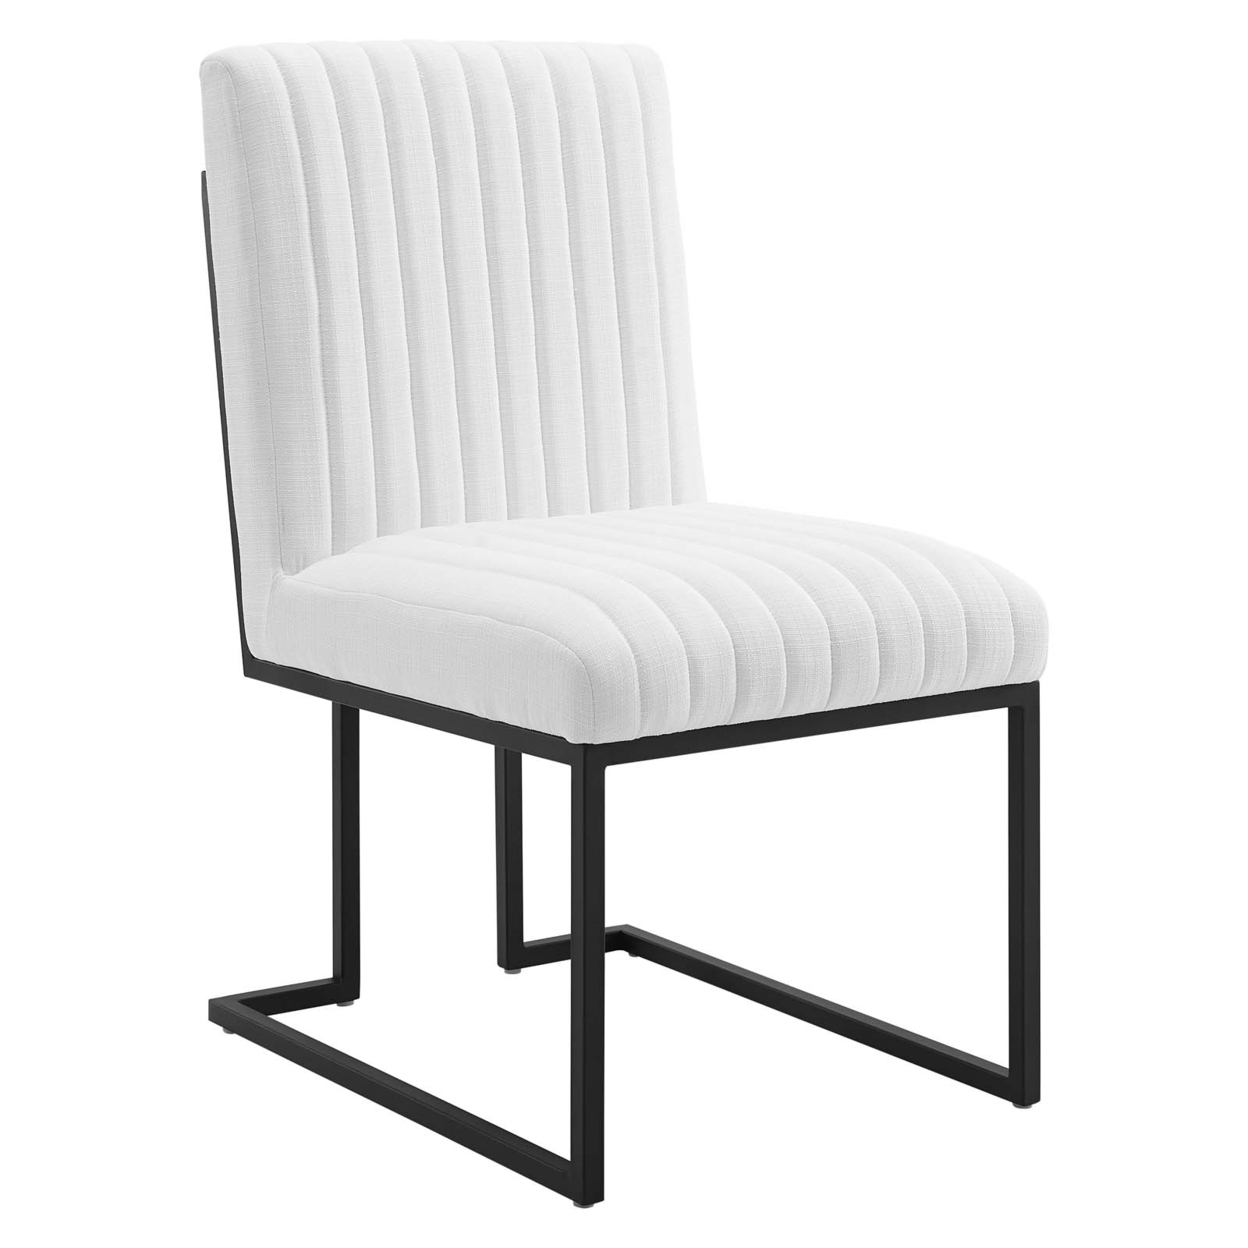 Indulge Channel Tufted Fabric Dining Chair, White